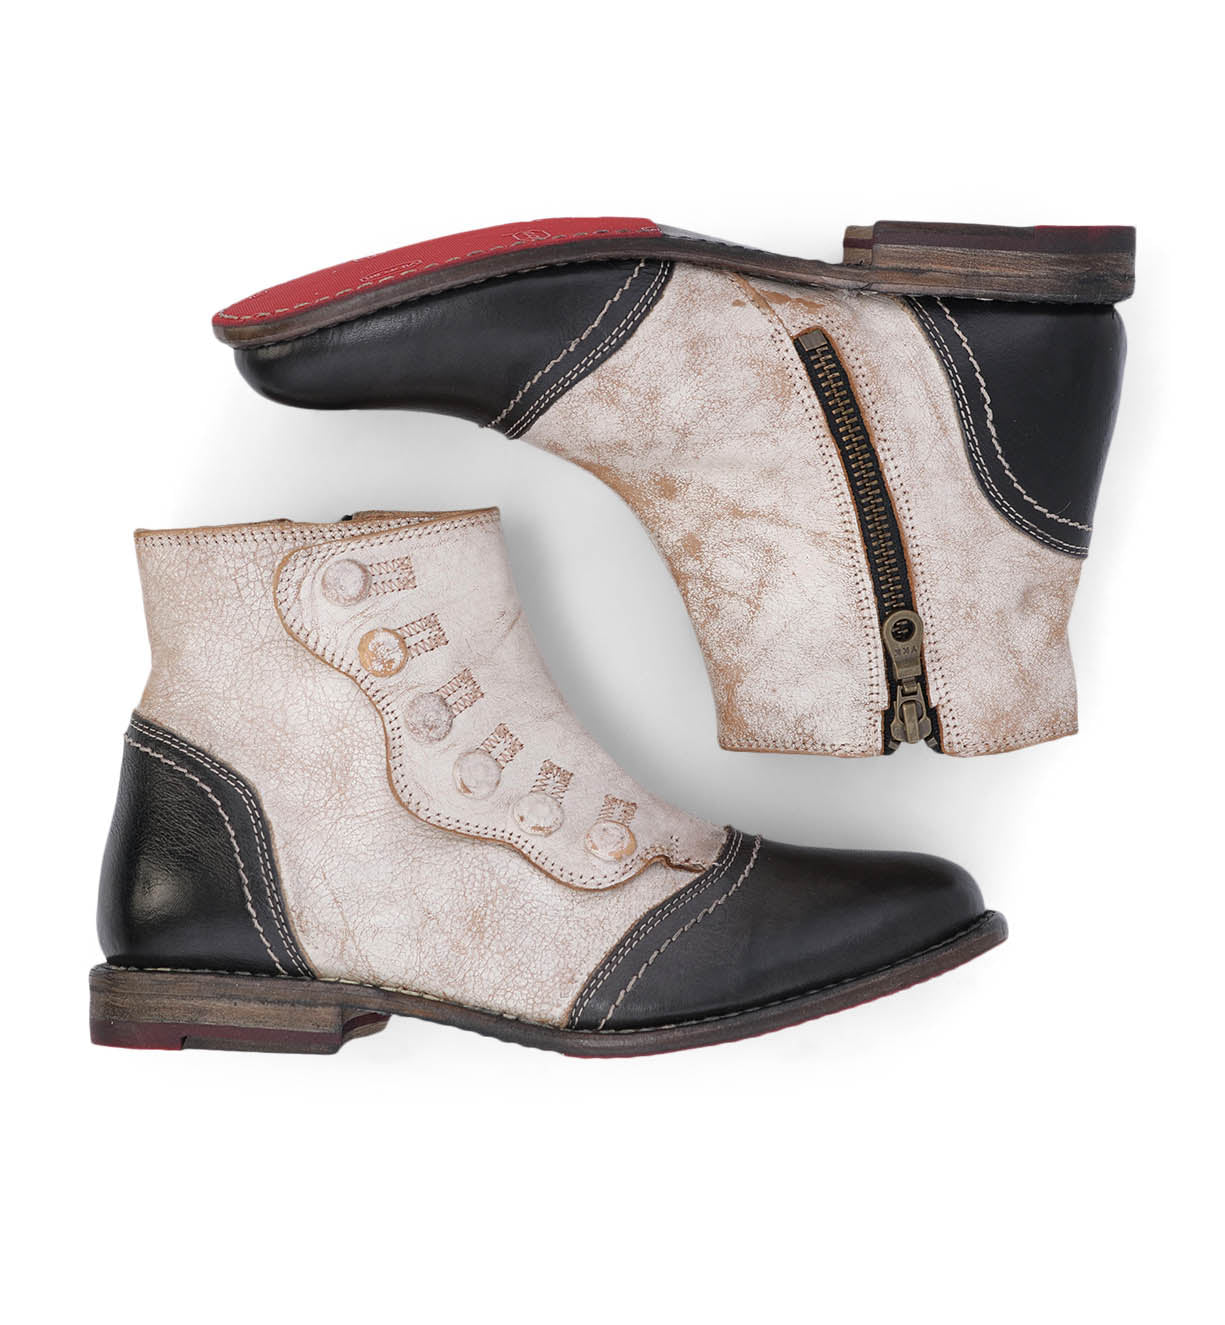 A pair of Oak Tree Farms Josephine women's leather ankle boots with a YKK zipper on the side.